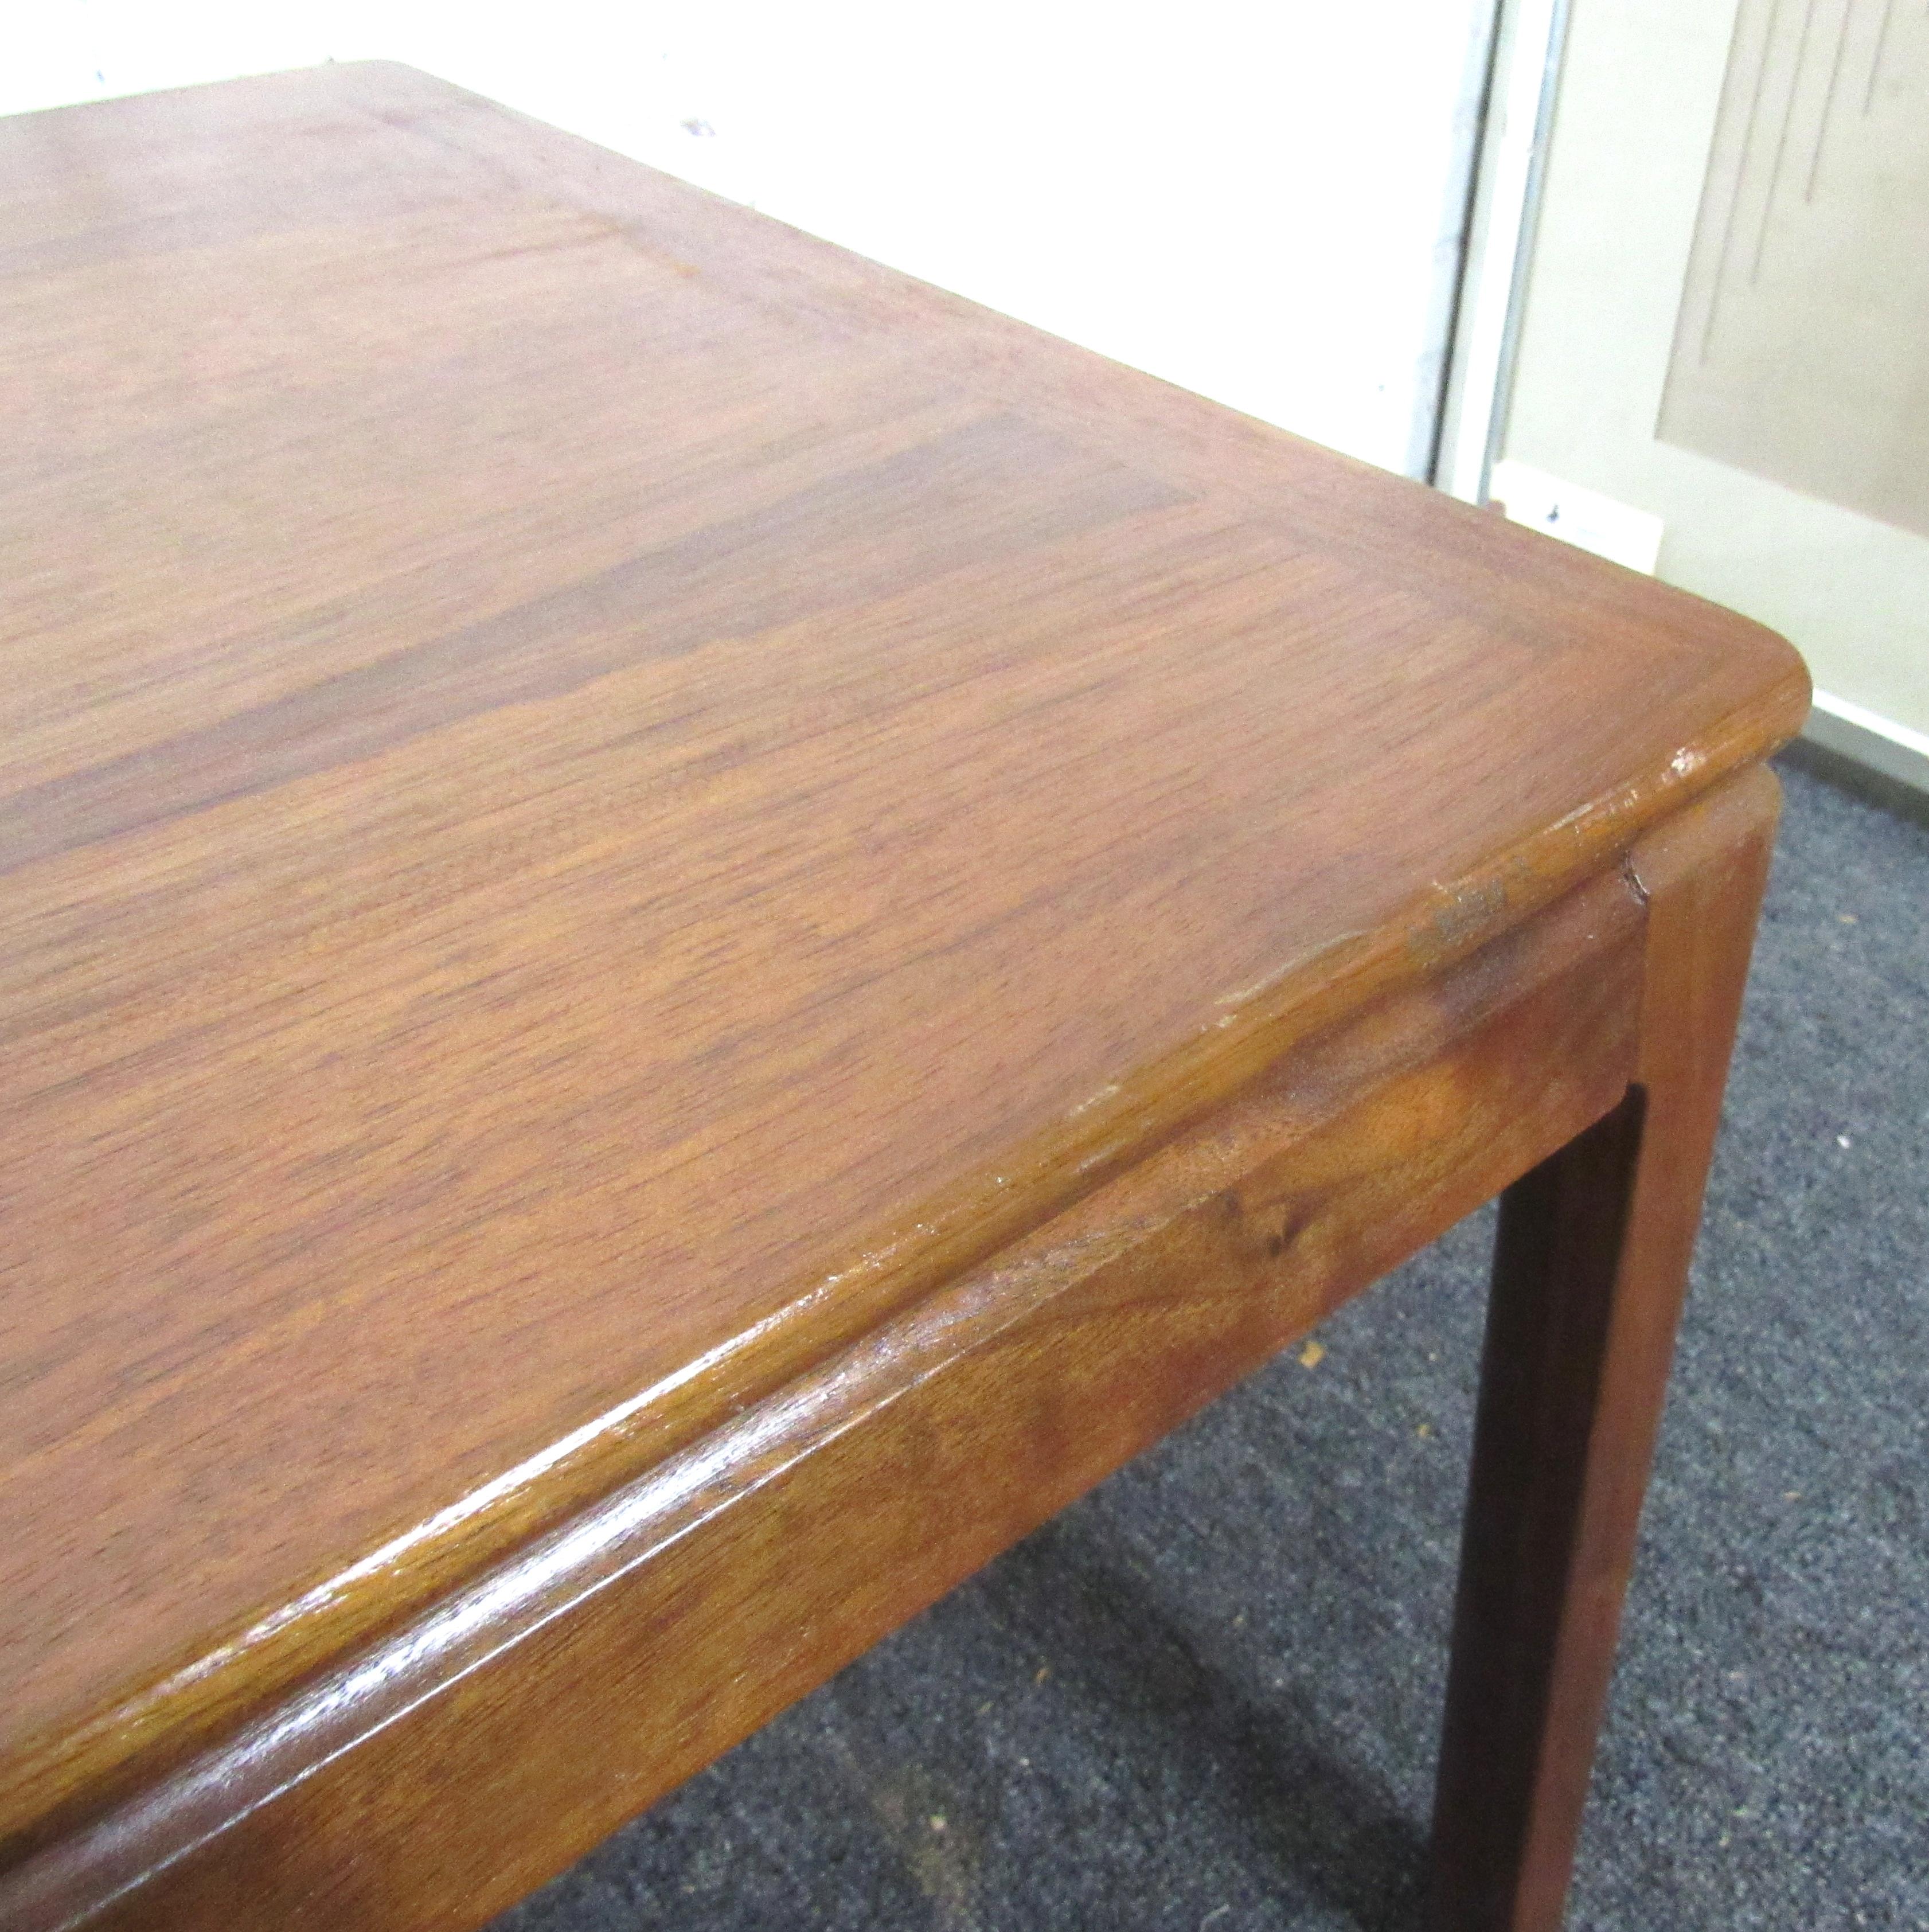 Danish Made in Denmark Teak Mid-Century Modern Coffee Table by Tarm Stole For Sale